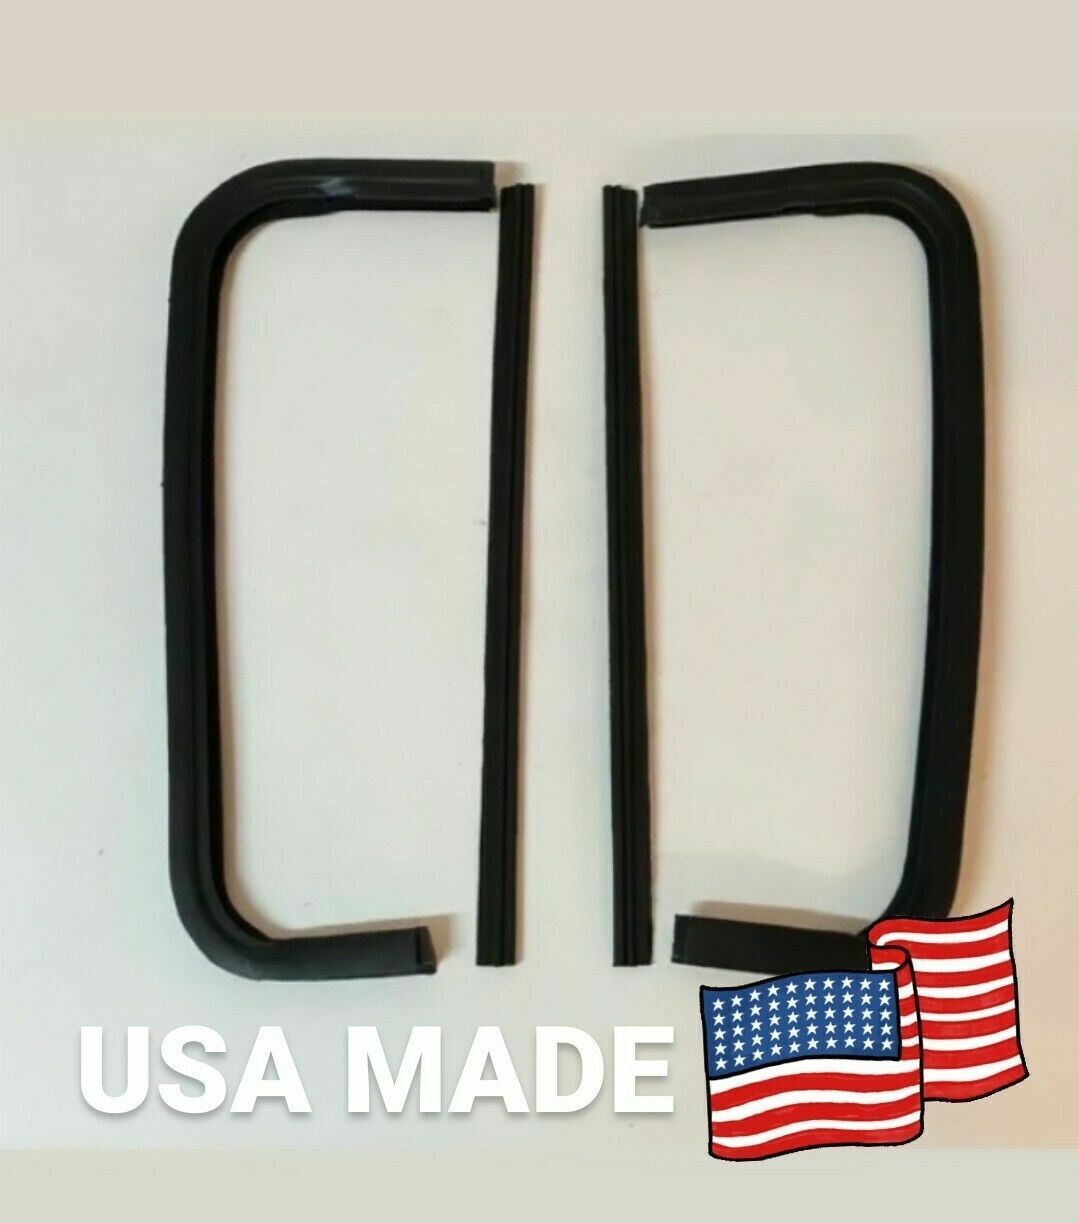 New USA Made Vent Window Rubber Weatherstrip Seal Pair 4pc 1960 - 1963 Chevy GMC Truck